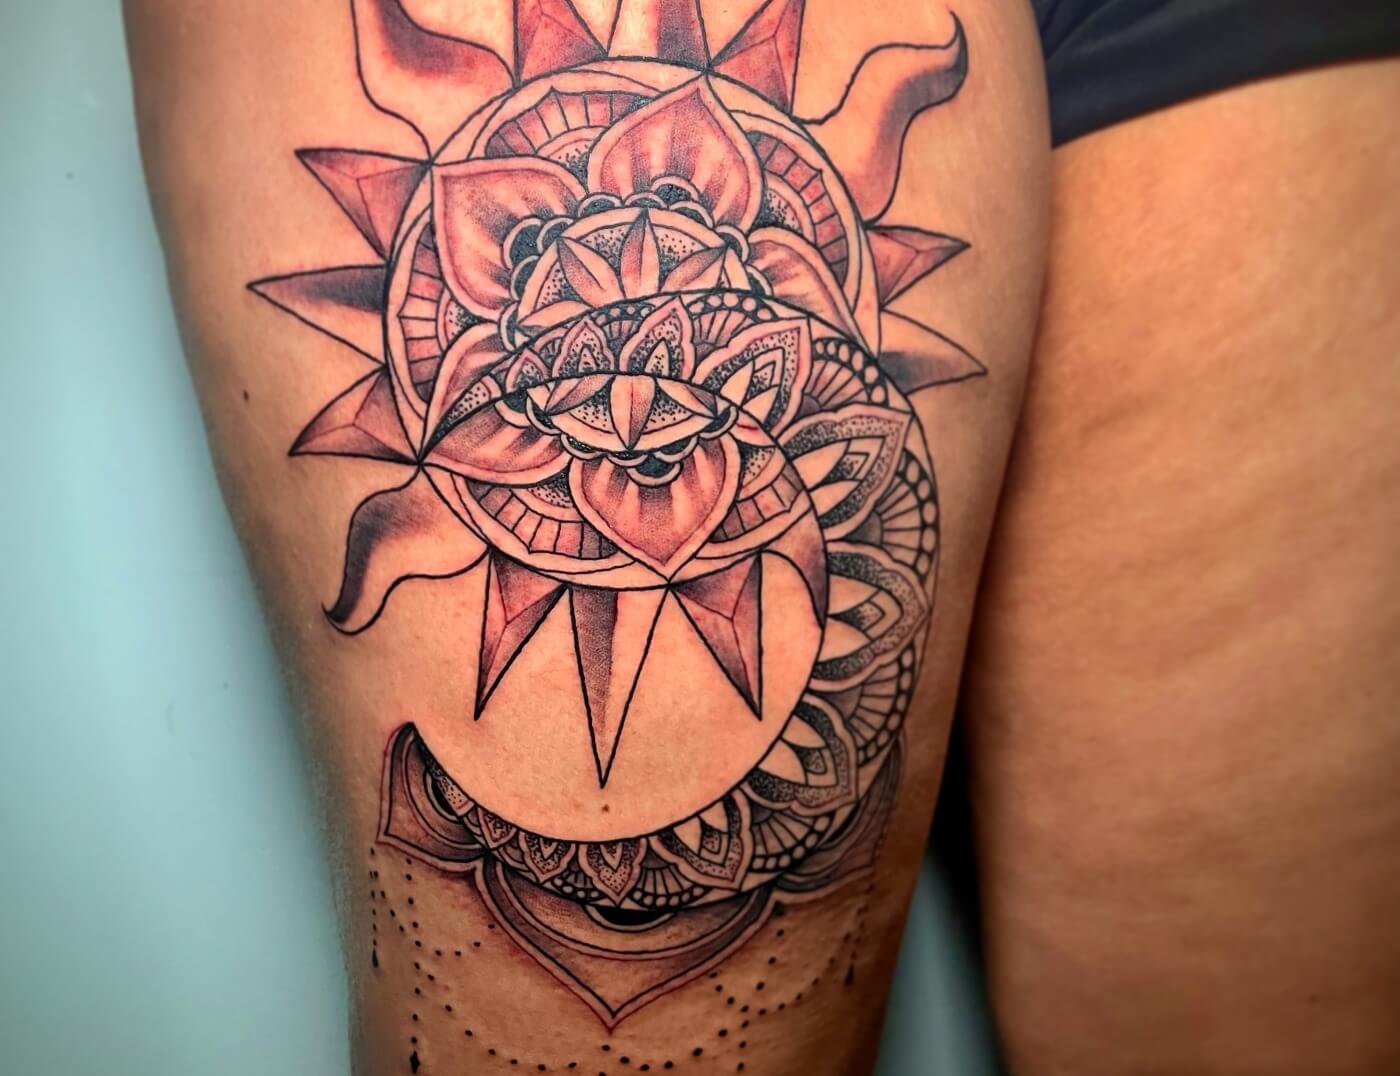 Sun & Moon Mandala Tattoo By Lyric TheArtist At Iron Palm Tattoos In Atlanta, Georgia. Lyric specializes in creating intricate Mandala tattoos. We're open late night until 2AM most nights. Call 404-973-7828 or stop by for a free consultation with Lyric or another Iron Palm tattoo artist. Walk-ins are welcome.